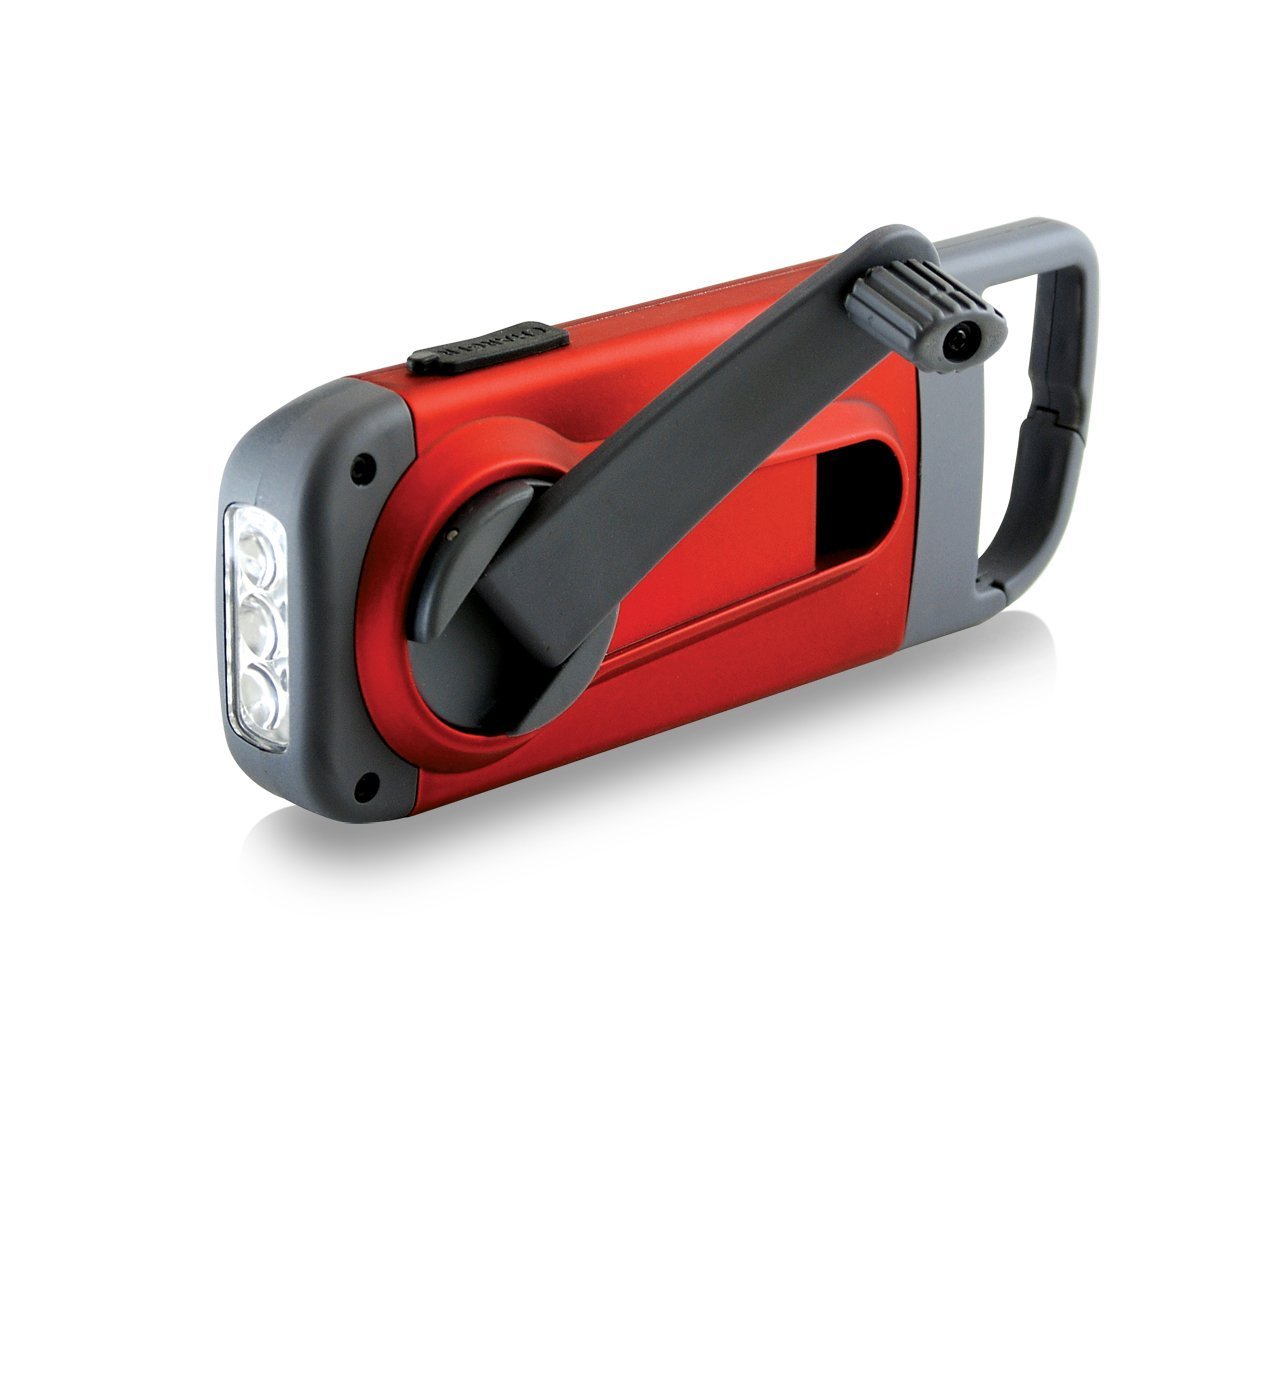 Eton American Red Cross Crank-Powered Clipray Clip-On Flashlight & Smartphone Charger, Solar Powered, Hand Crank, Cherry Red, Commitment to Preparedness